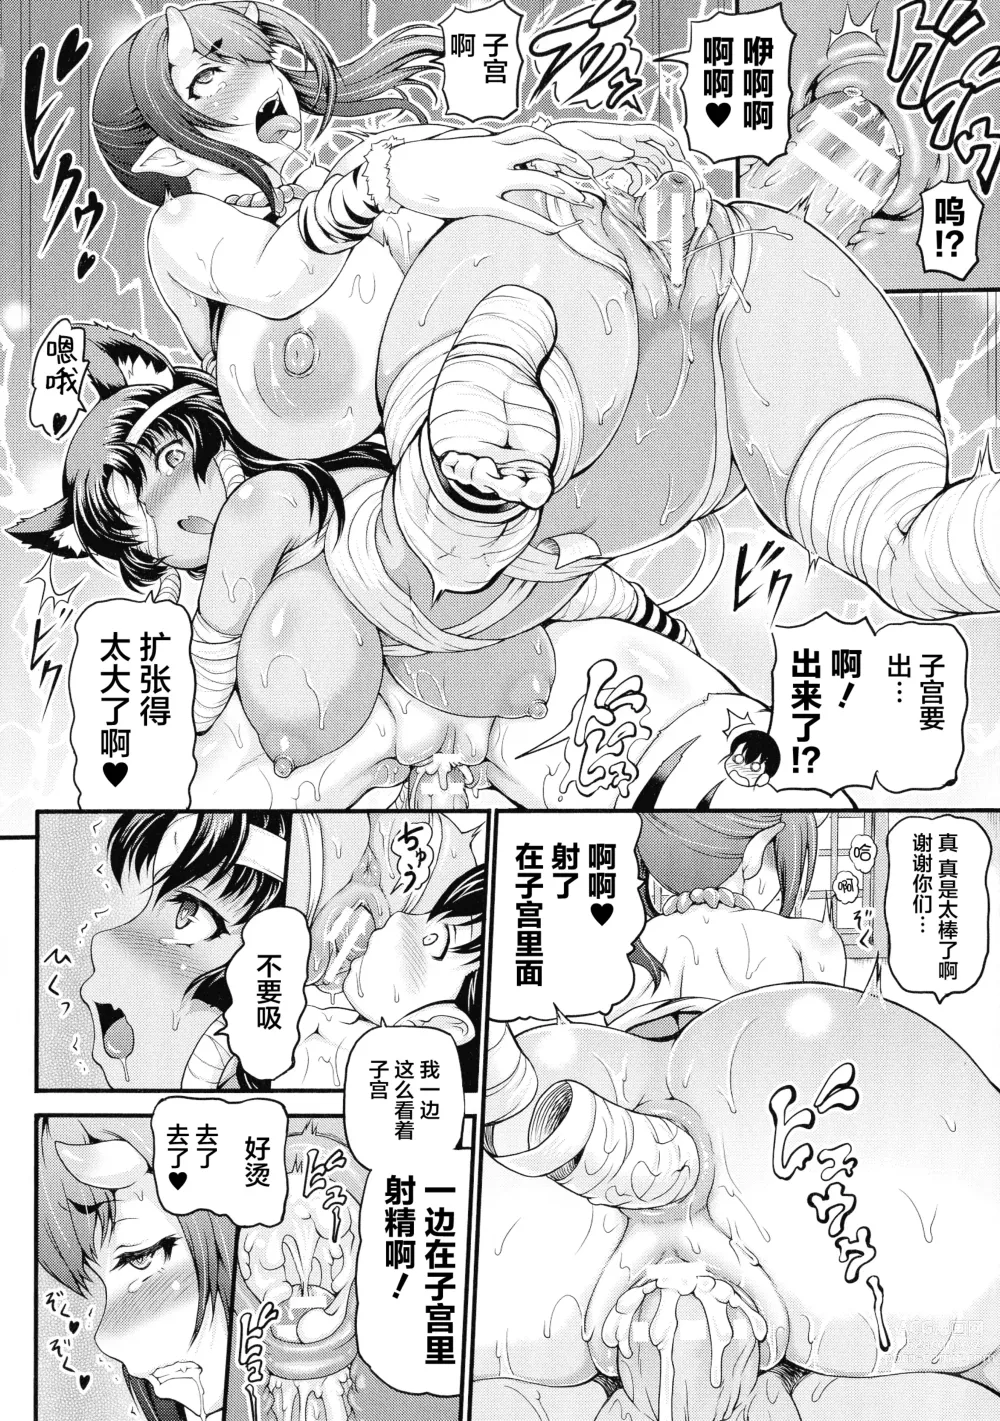 Page 186 of manga Isekai Shoukan - Brothel in Another World